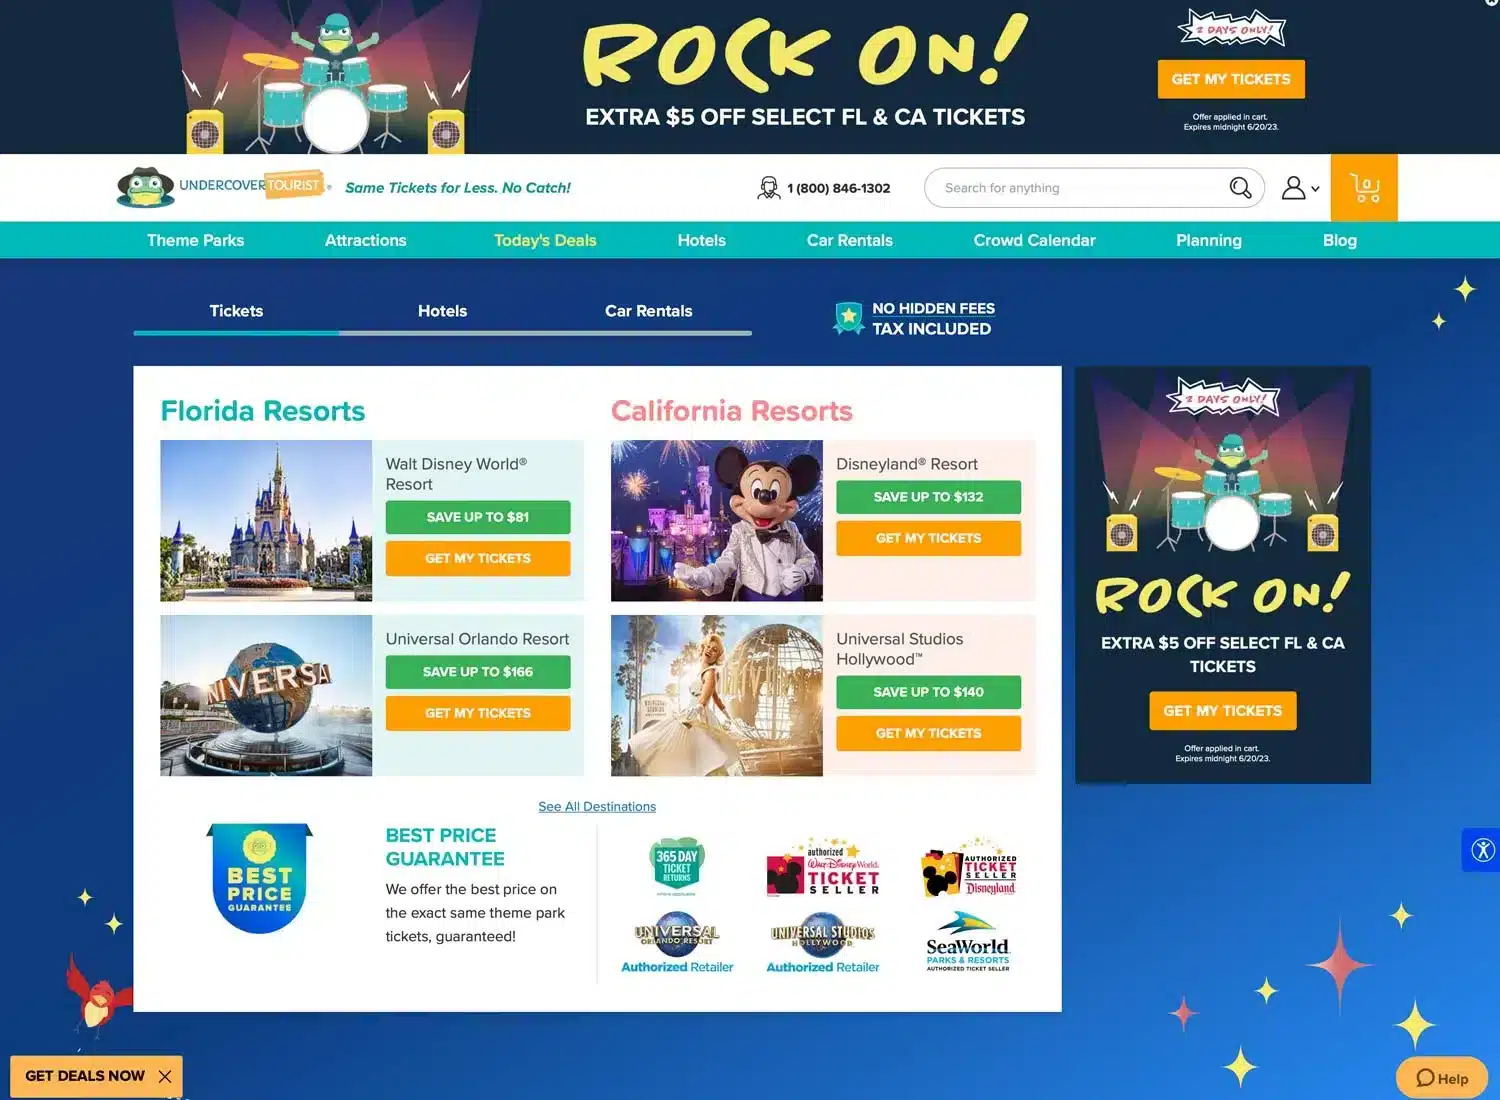 Undercover Tourist Website - How to get discount tickets at Disney World